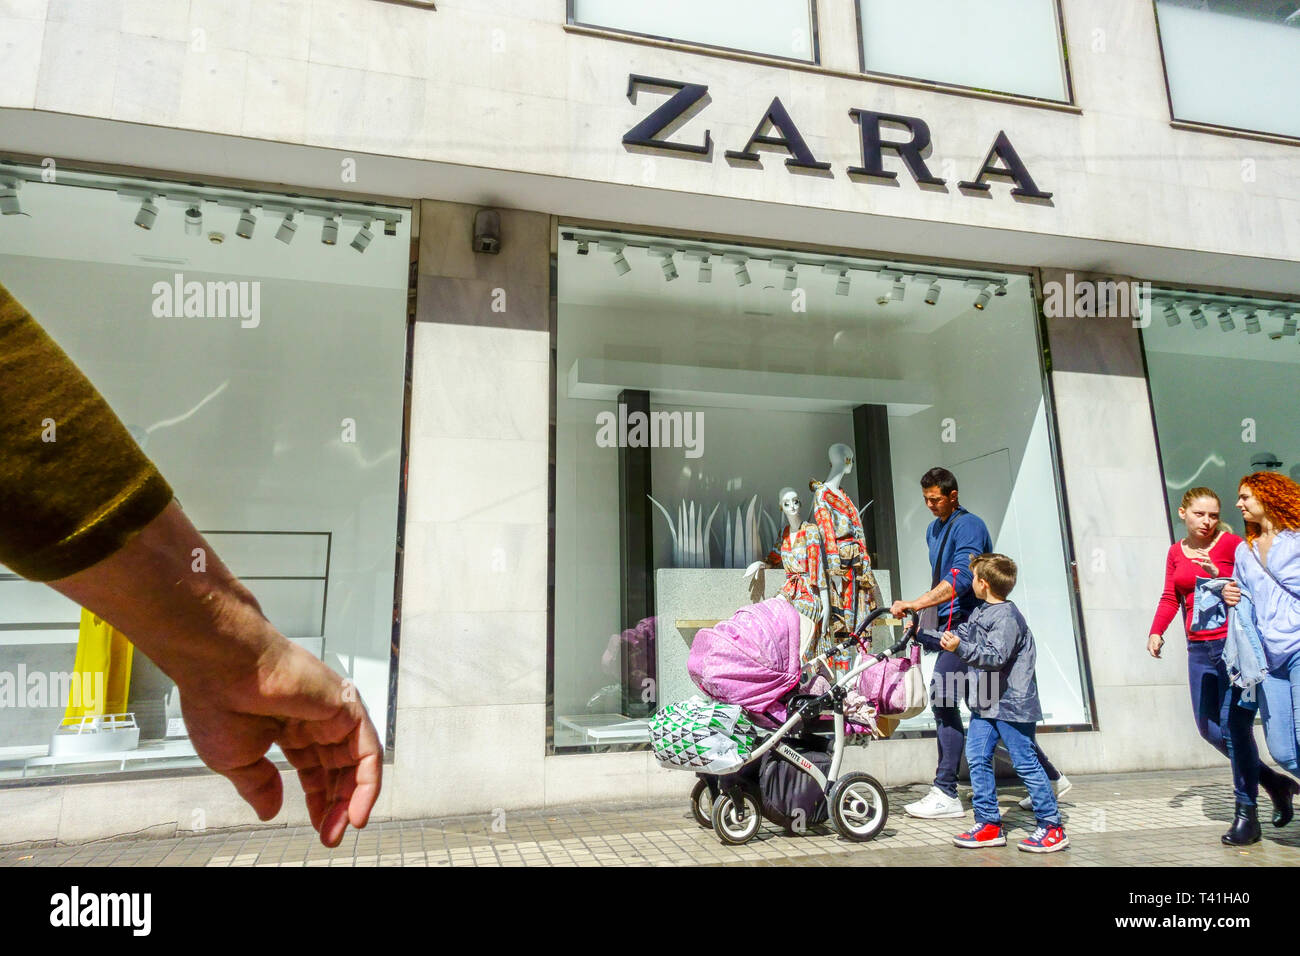 Zara shop sign hi-res stock photography and images - Alamy